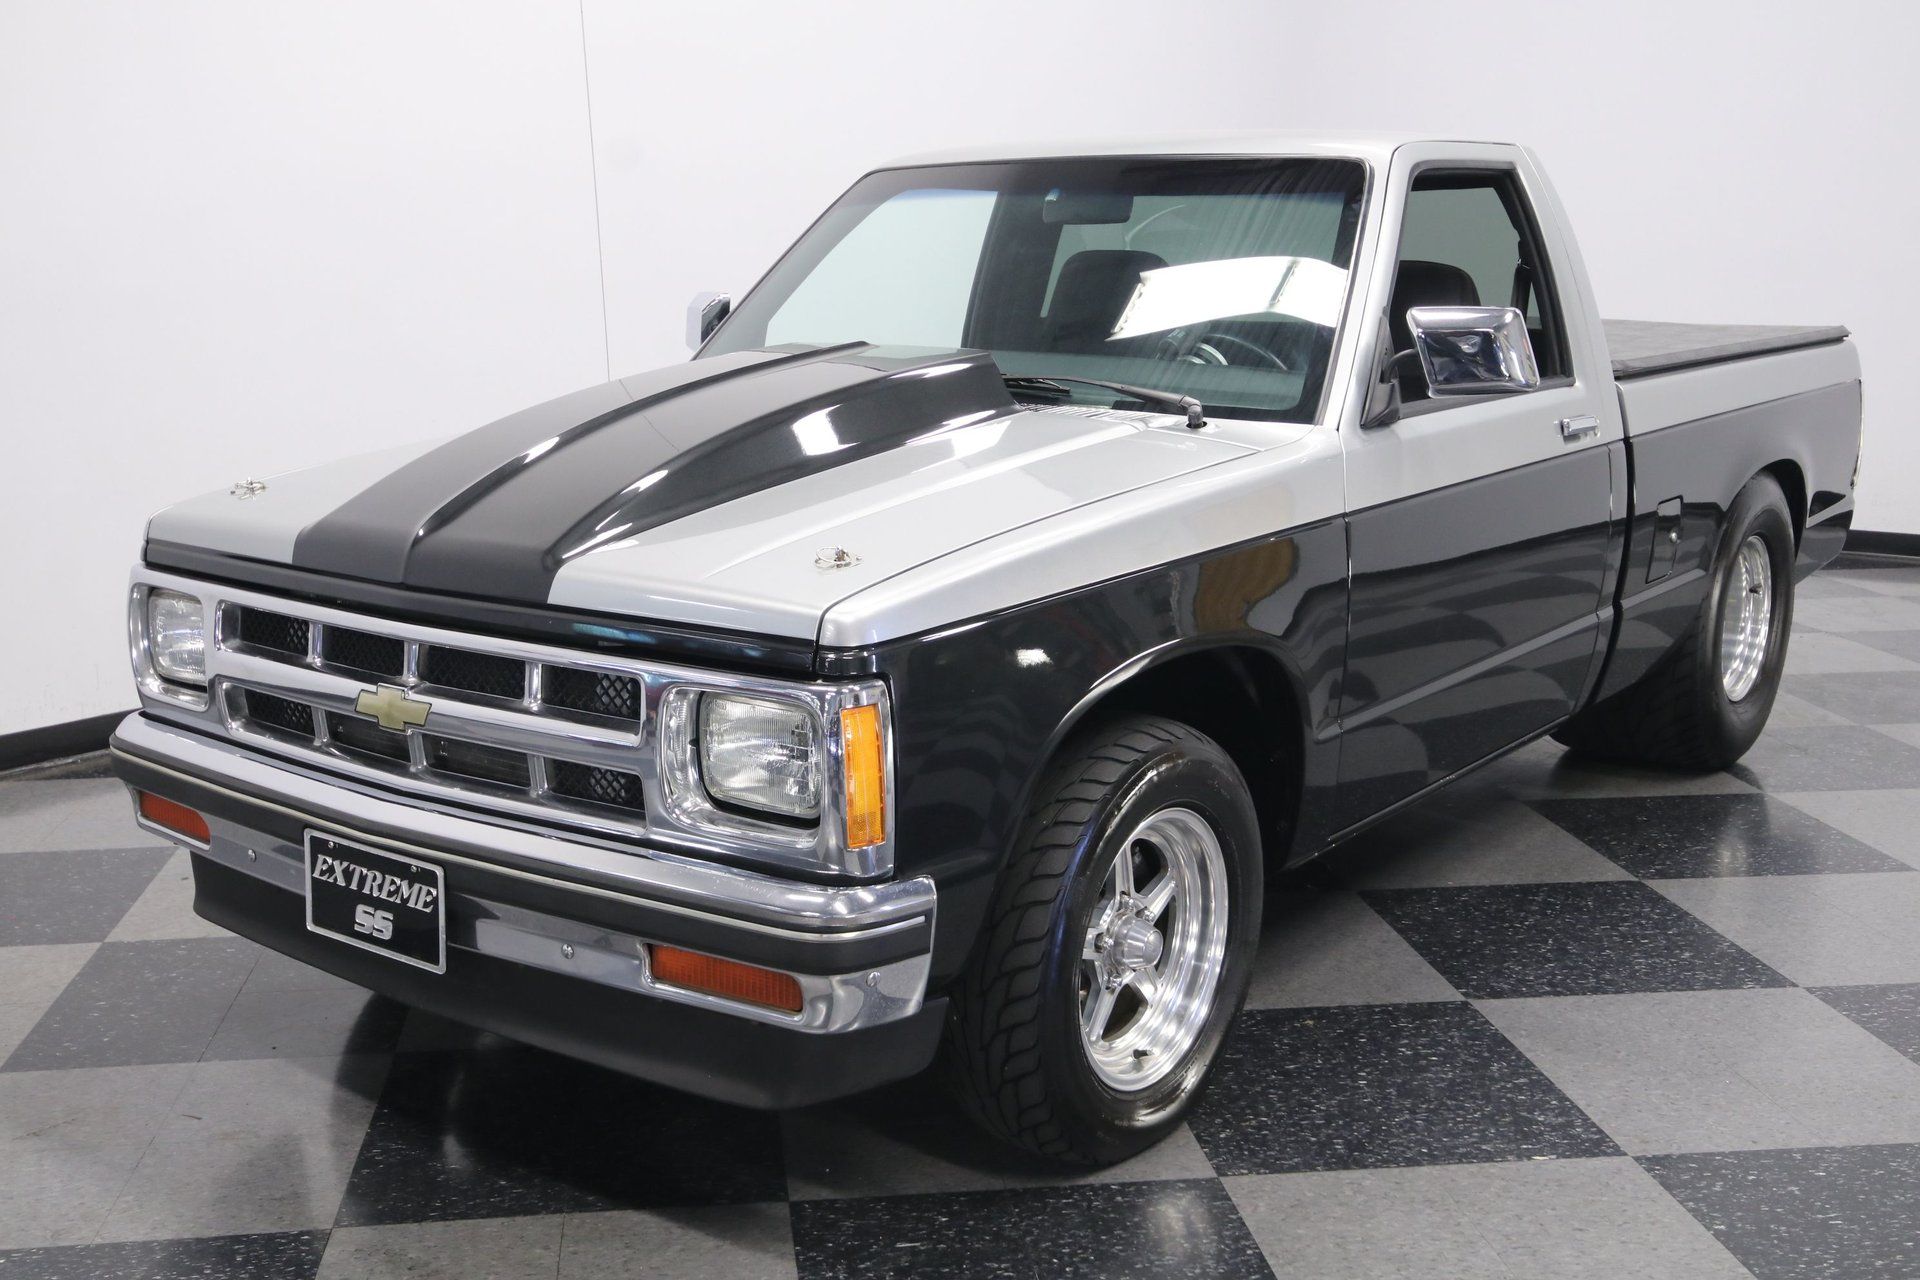 Lay Rubber In This Pro-Street 1985 Chevrolet S-10.